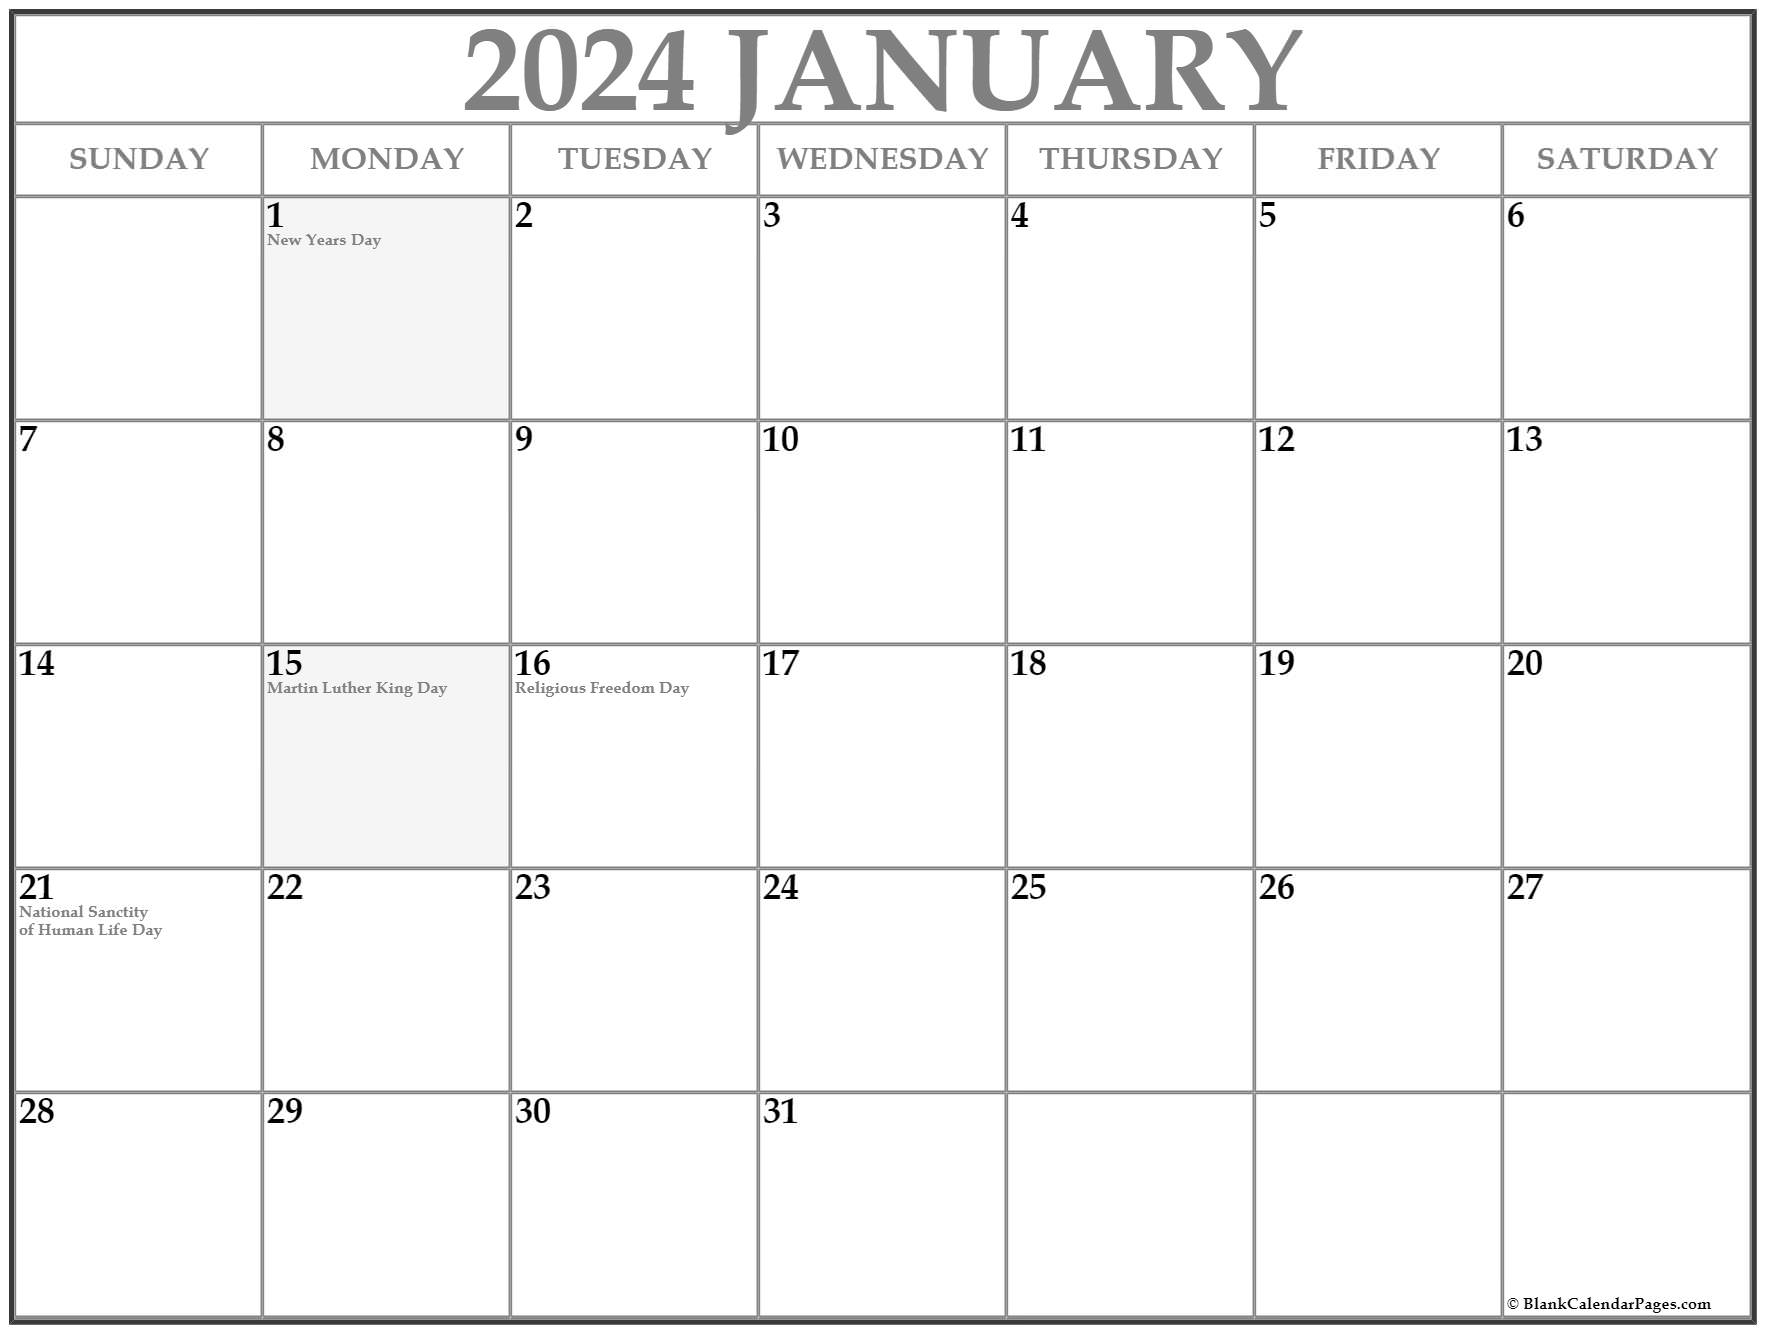 Collection of January 2021 calendars with holidays